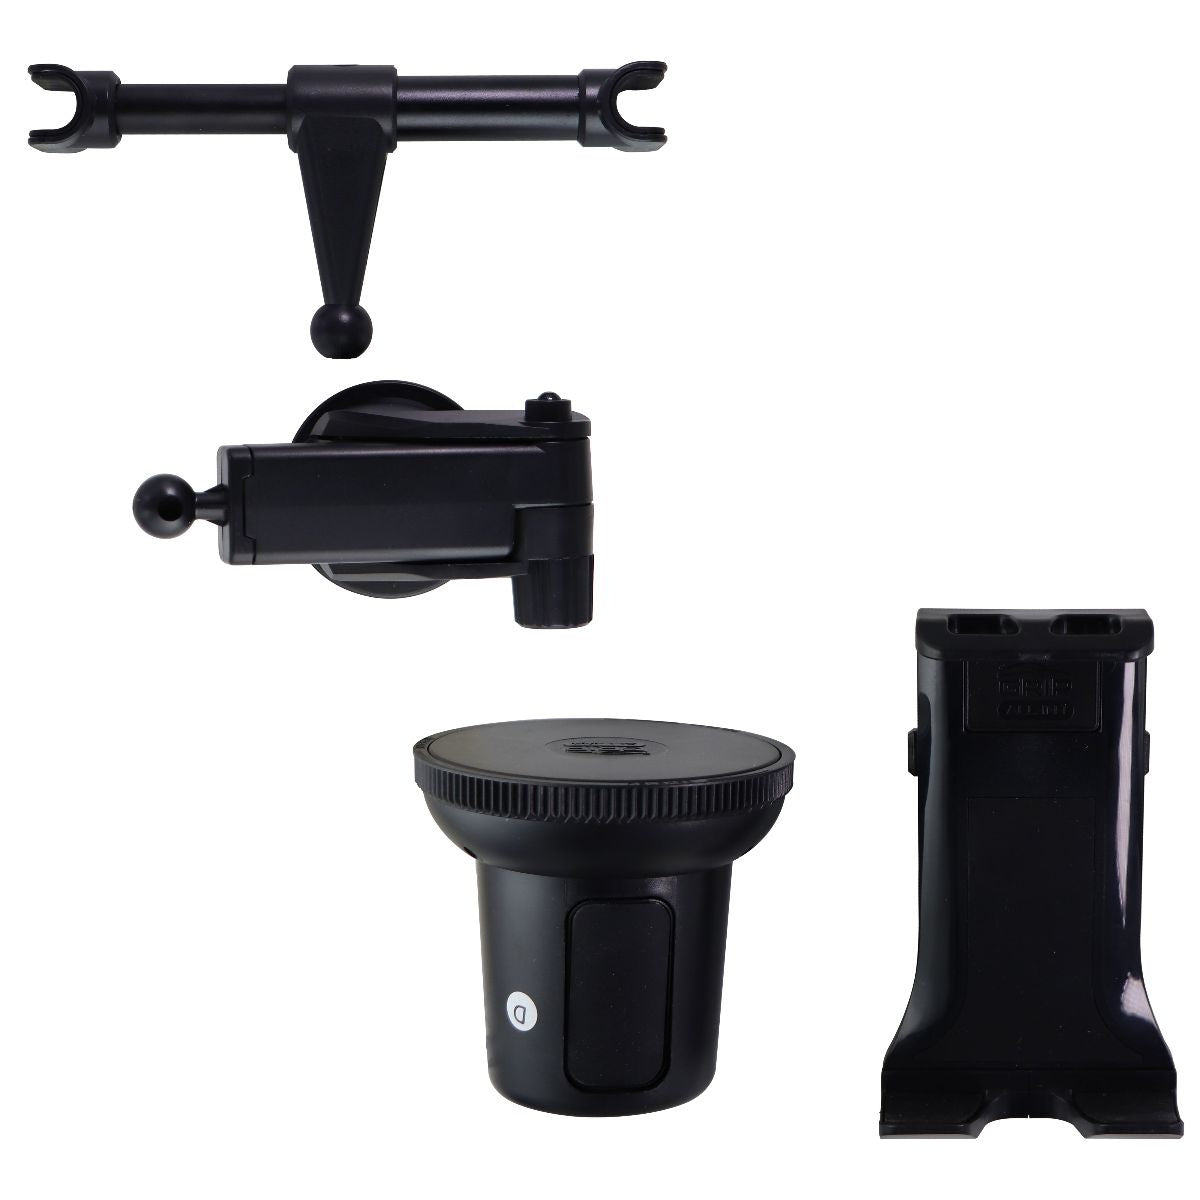 GRIP All-In-1 Tablet Mount with Universal Holder and Suction Mount - Black